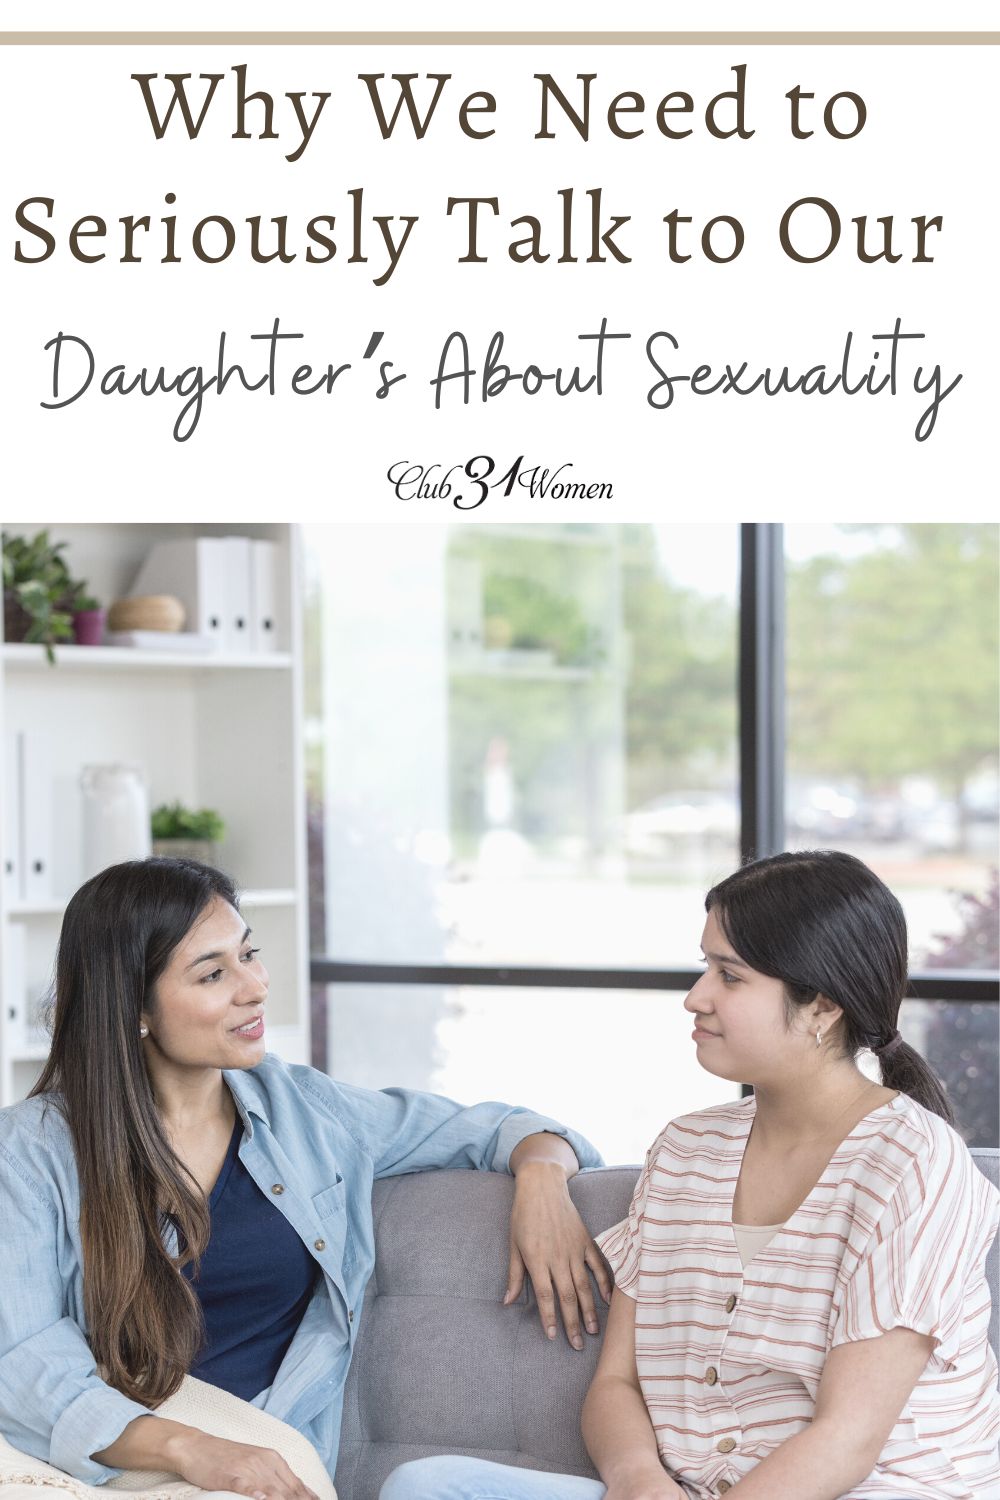 As a mom, it's so important we have those vital conversations about sexuality with our daughters. Helping our daughters feel secure and confident starts at home. via @Club31Women